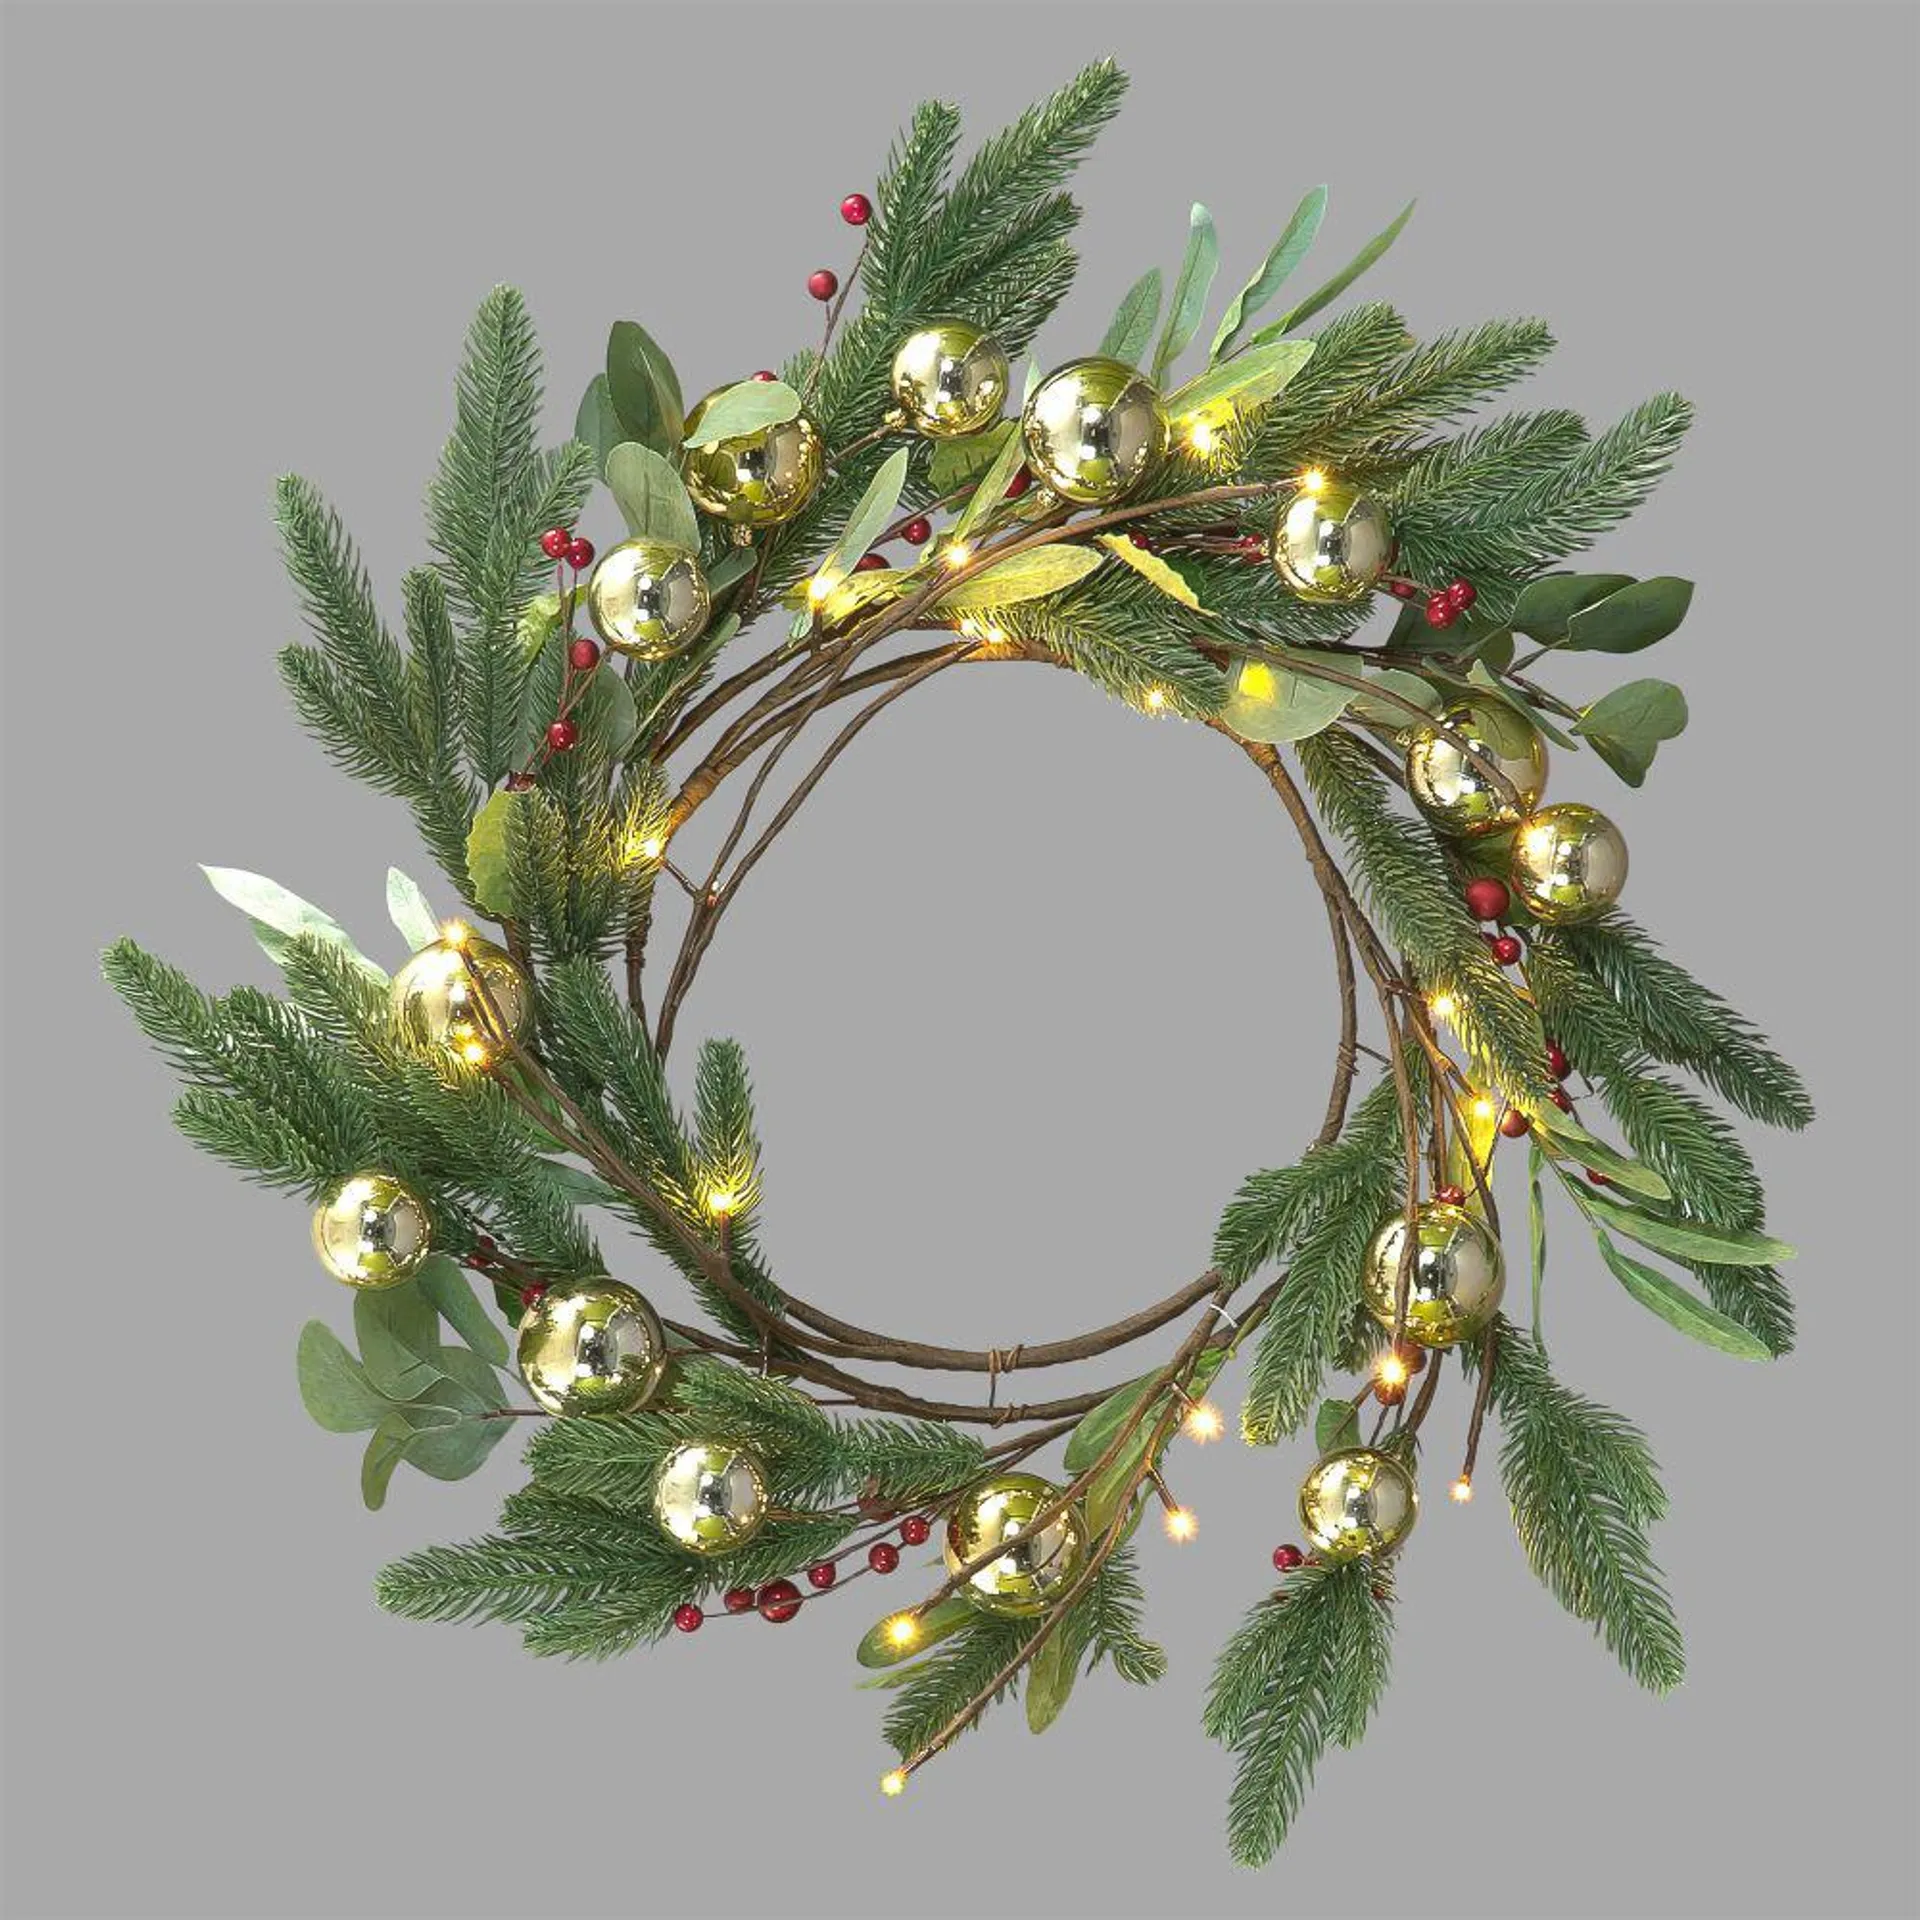 60cm Mixed Leaf Christmas Wreath With Red Berries